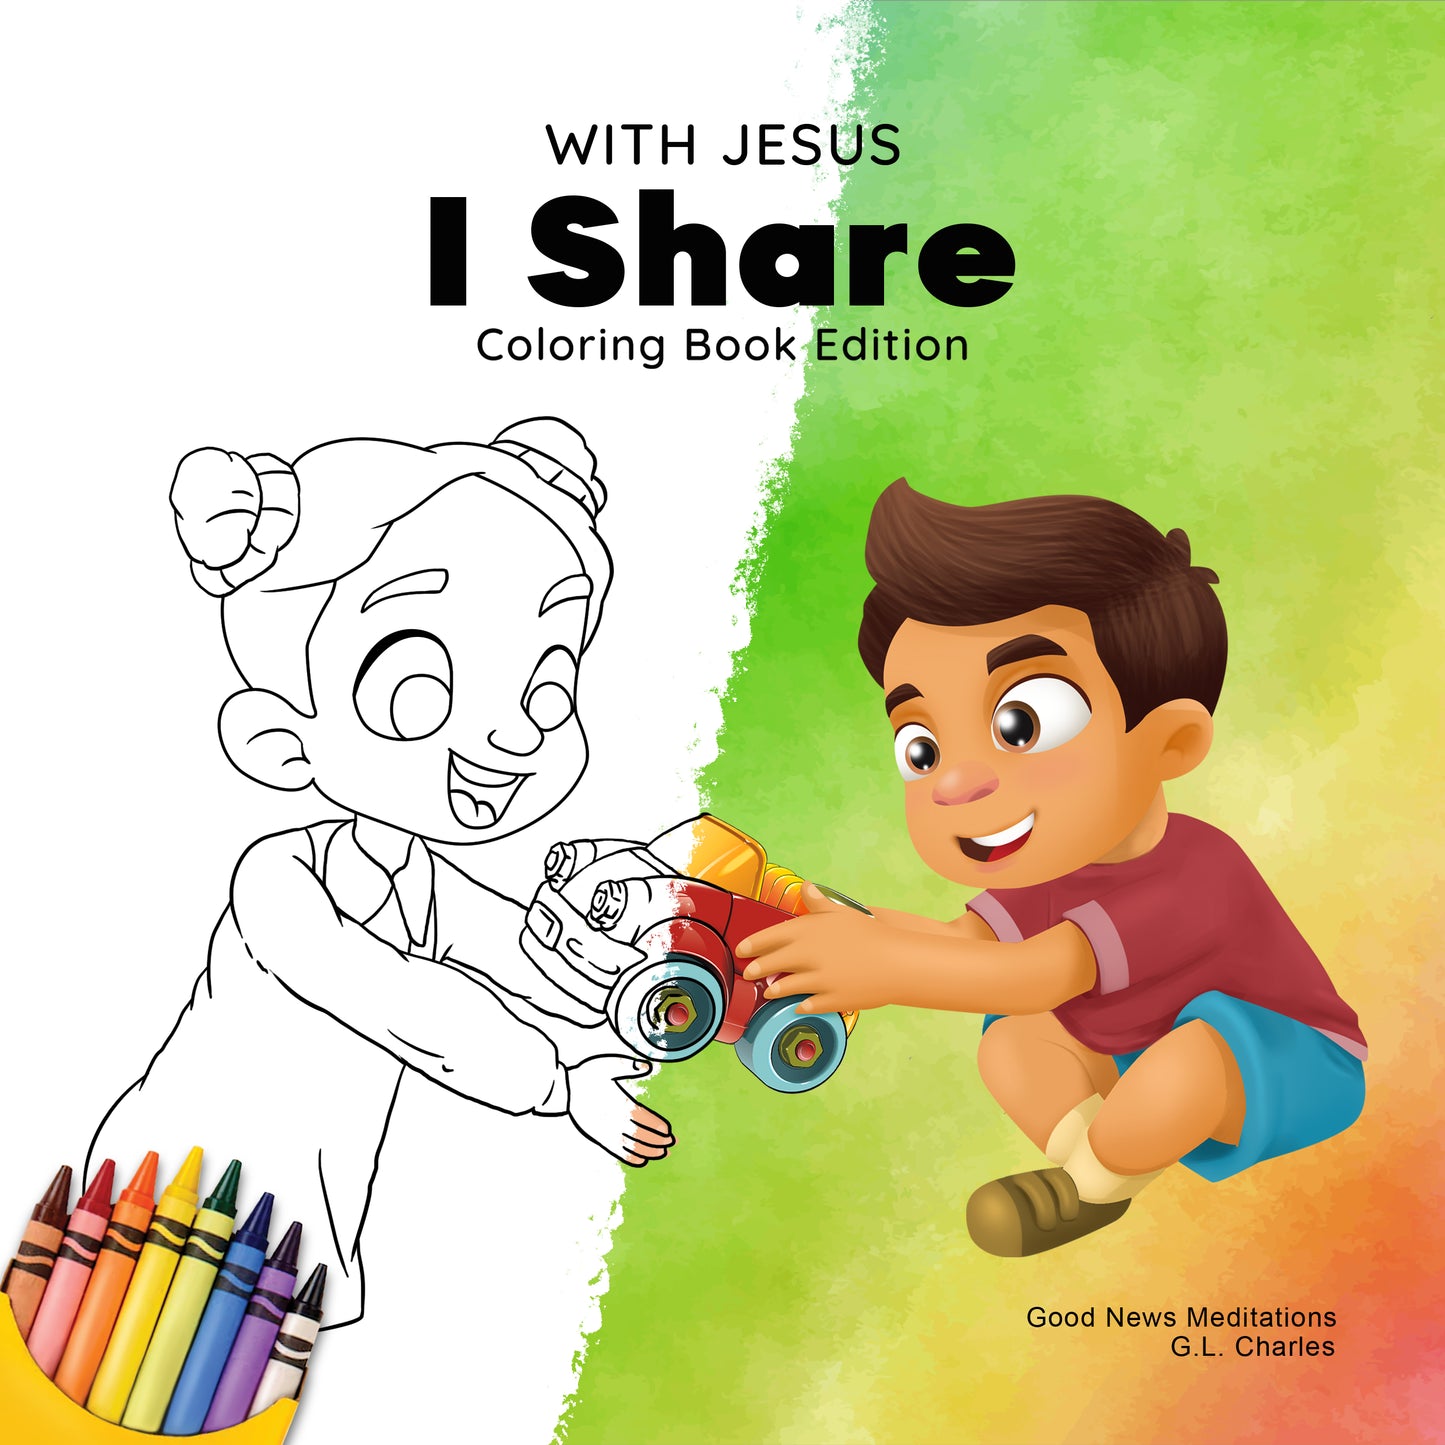 With Jesus I Share Coloring Book - Print Ready - Digital Product - Instant Download